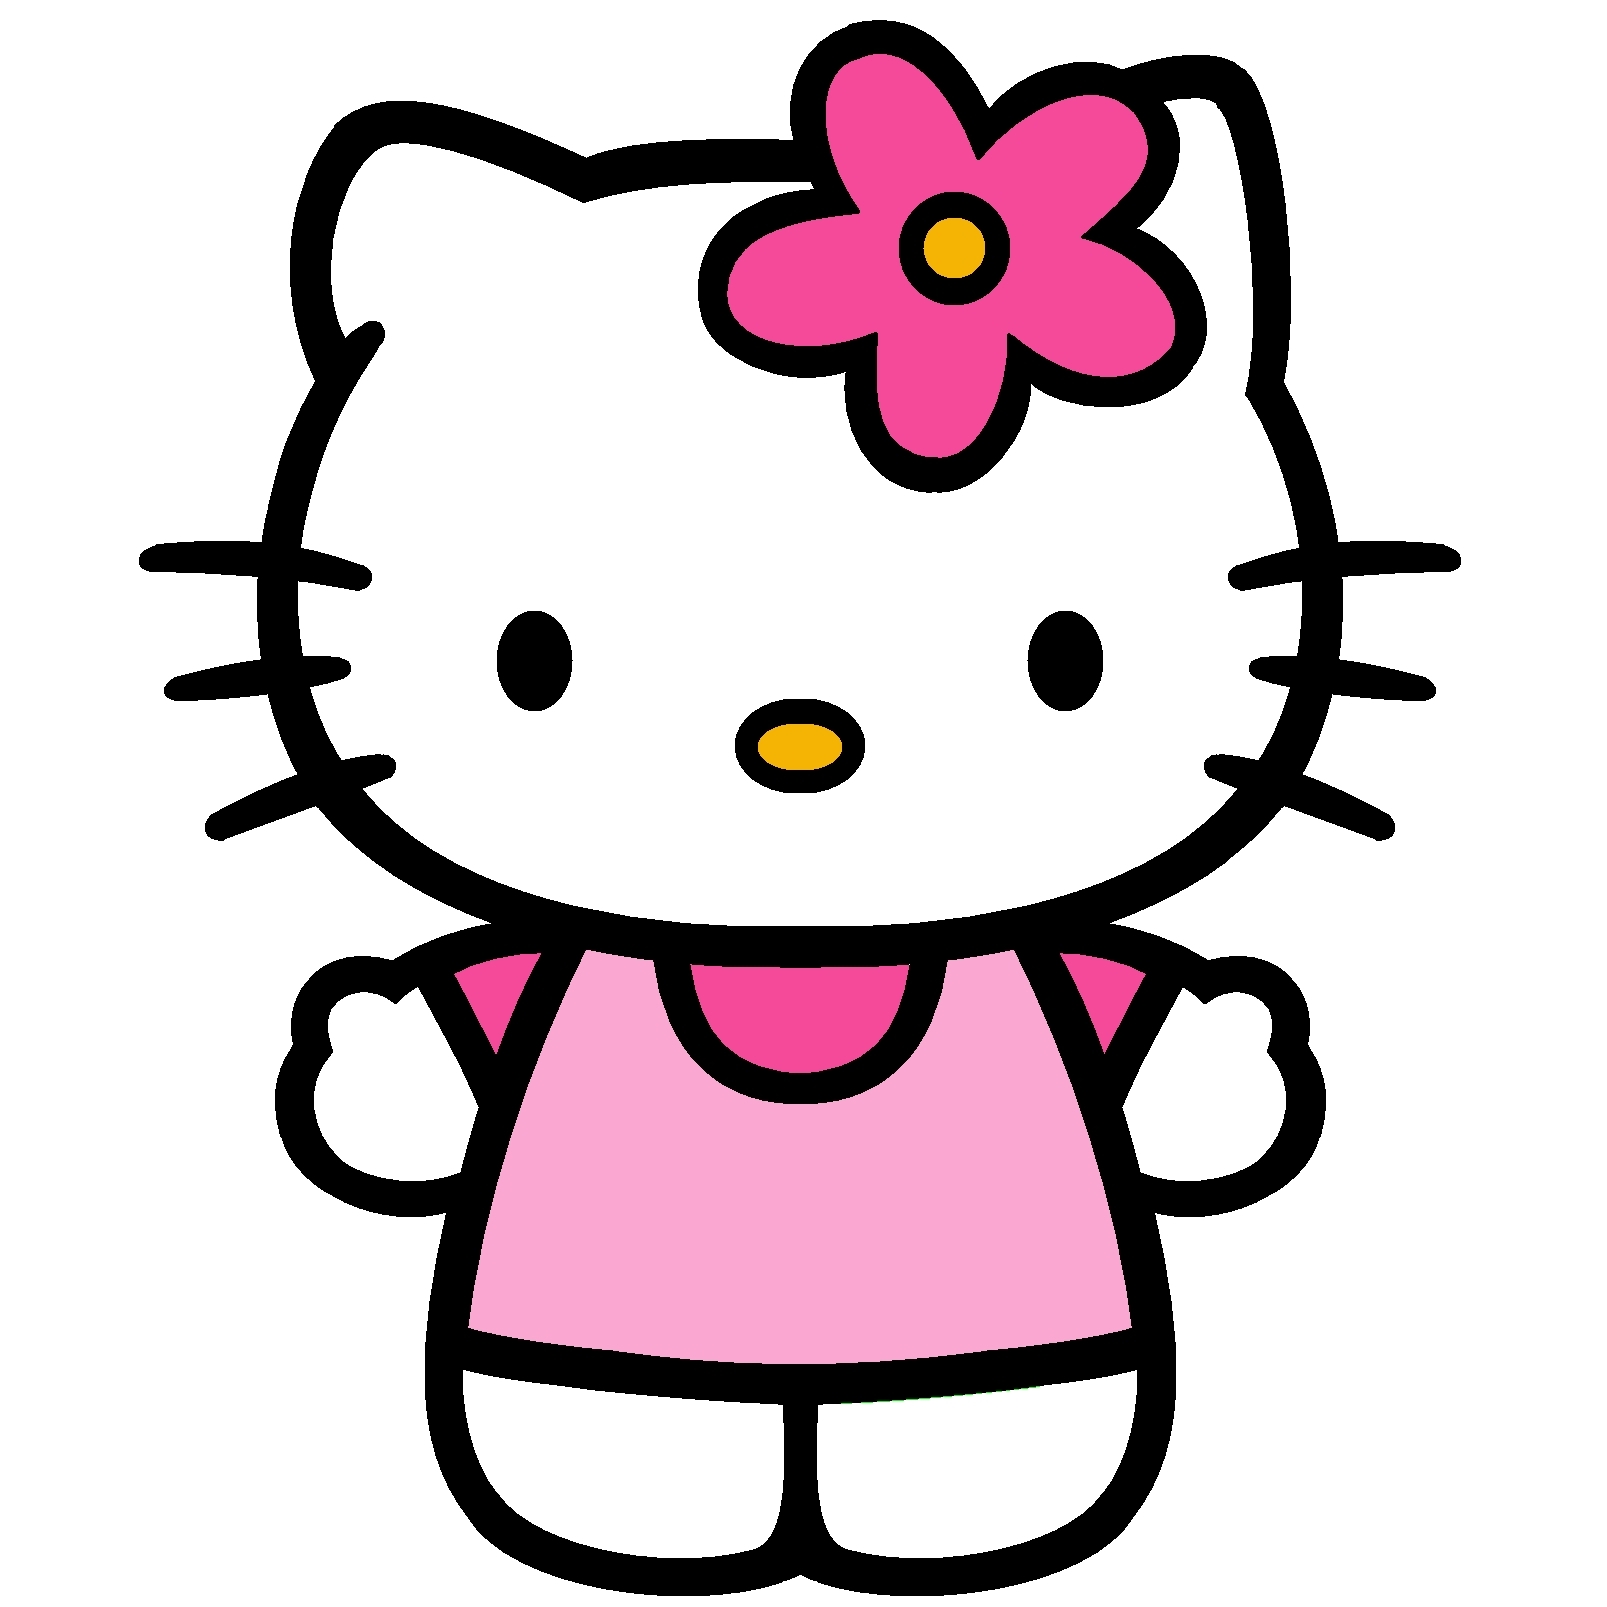 10 New Hello Kitty Images Free Download FULL HD 1080p For PC Background